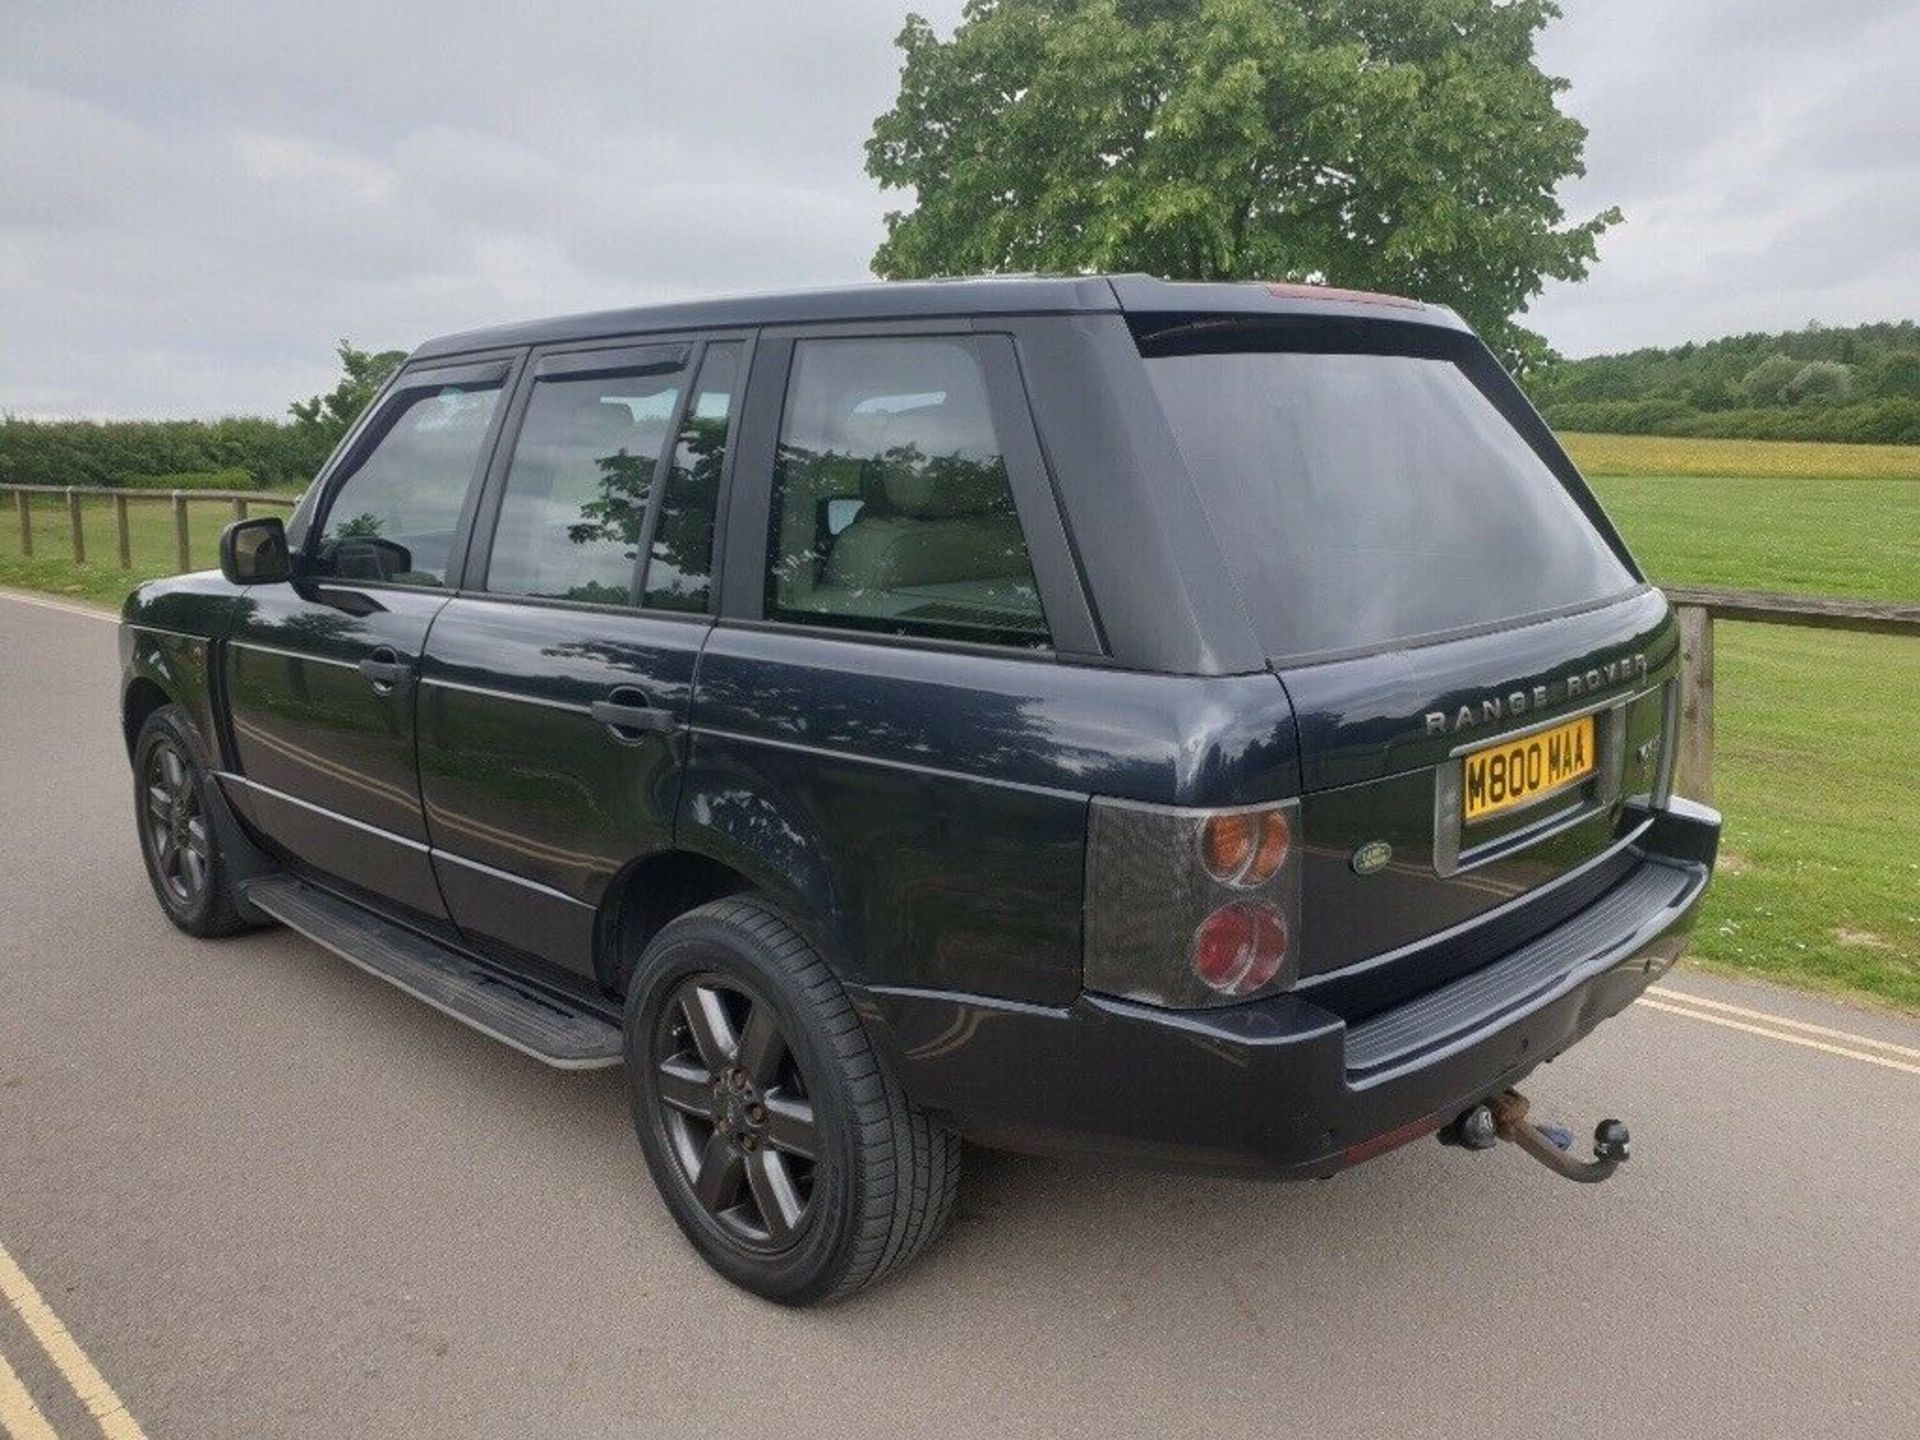 2002/02 REG LAND ROVER RANGE ROVER VOGUE V8 4X4 WITH LPG GAS CONVERSION & CERTIFICATE *NO VAT* - Image 4 of 9